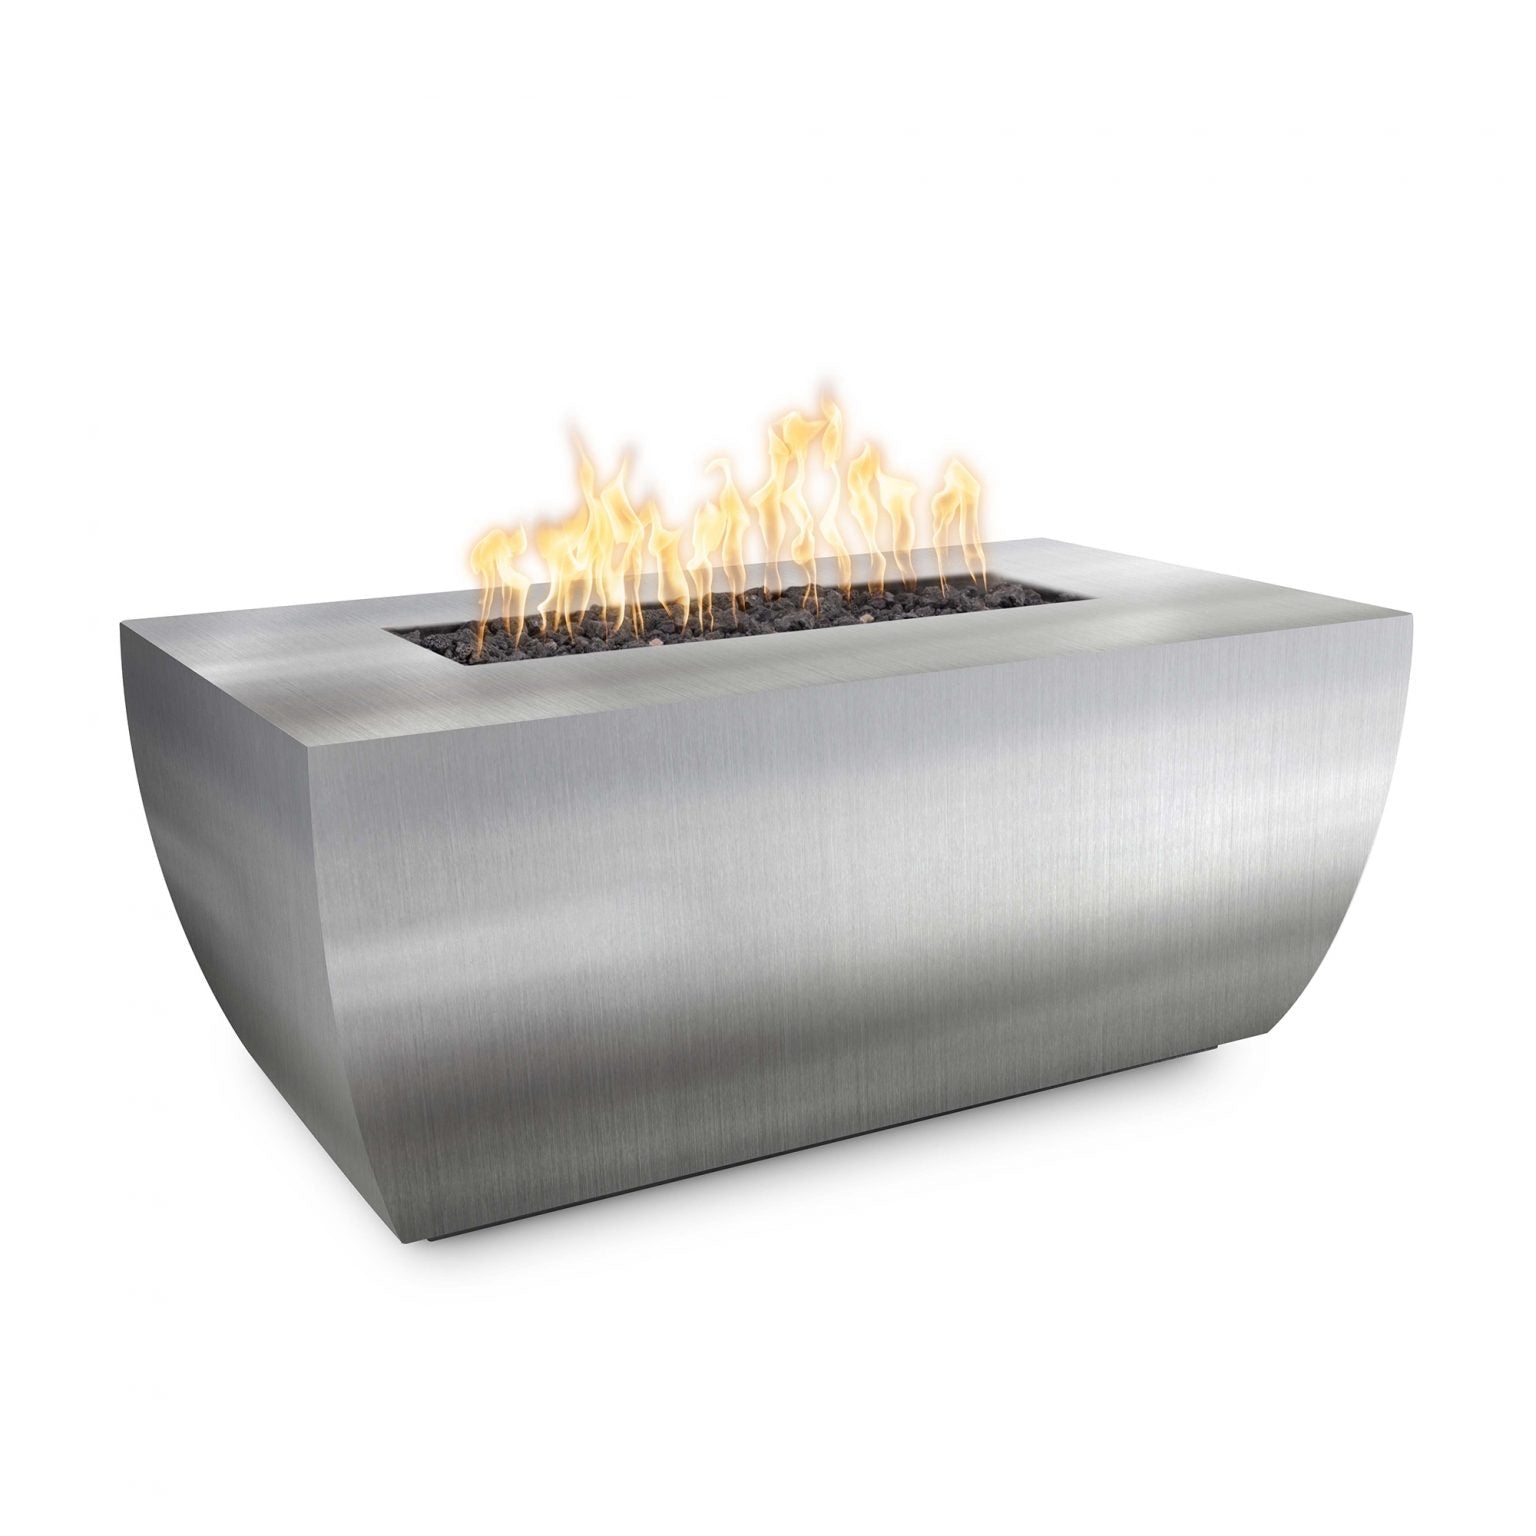 The Outdoor Plus Fire Pit 48" x 28" / Match Lit The Outdoor Plus Avalon 15" Tall Linear Fire Pit | Stainless Steel OPT-AVLSS4815